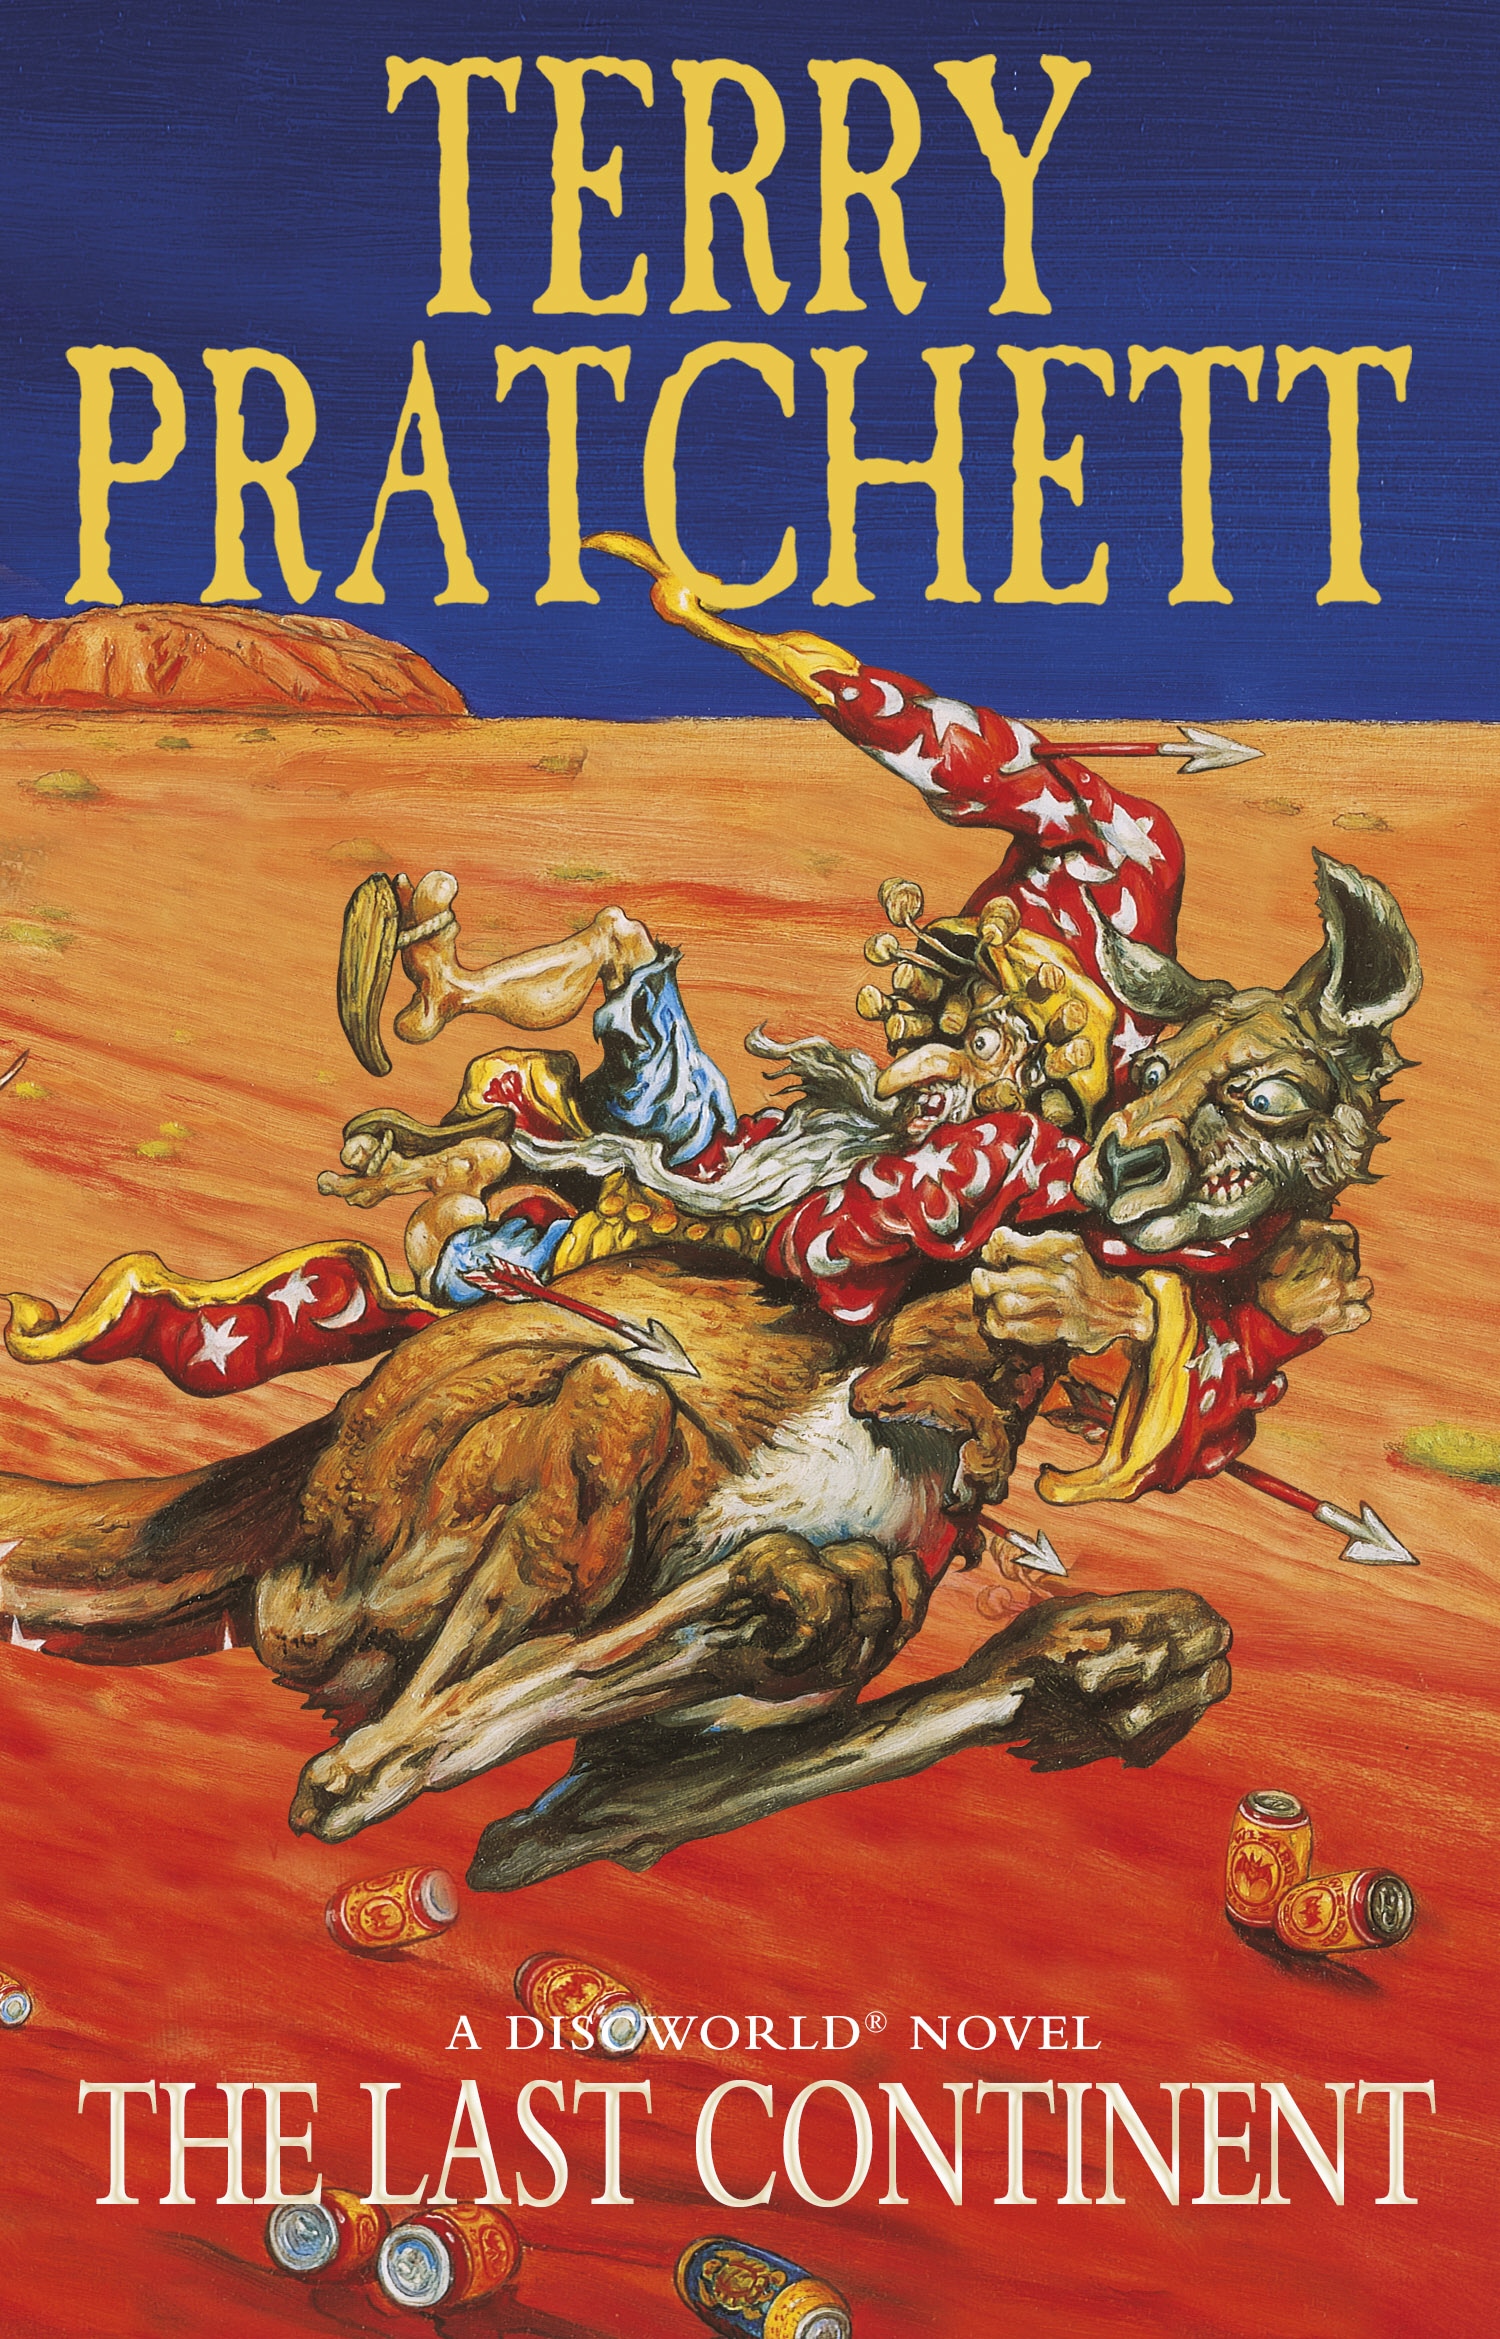 Book “The Last Continent” by Terry Pratchett — March 1, 1999